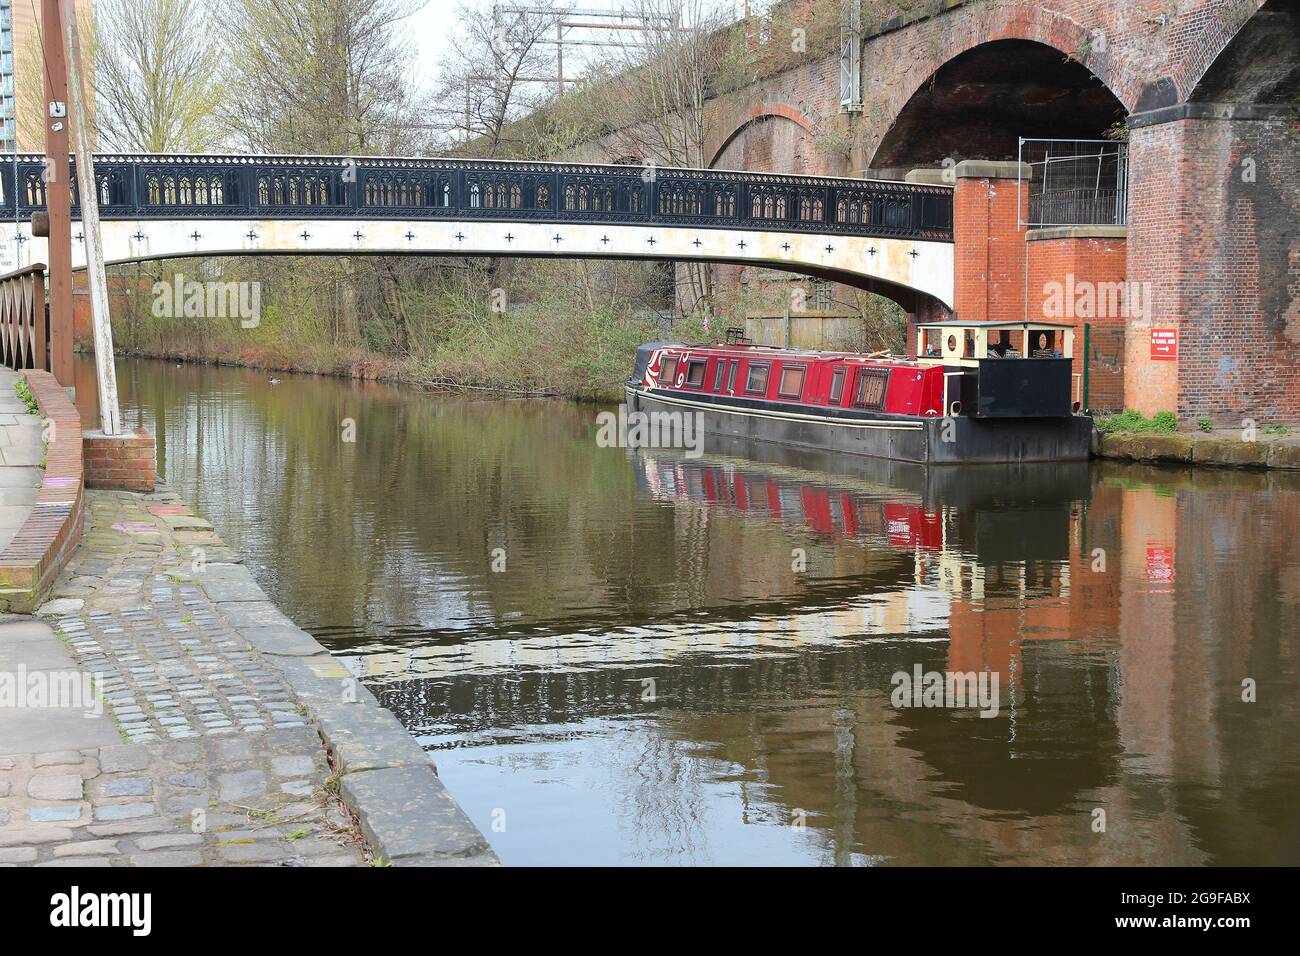 Manchester canals, UK. Historic Castlefield district, waterway canal area with narrowboats. Stock Photo